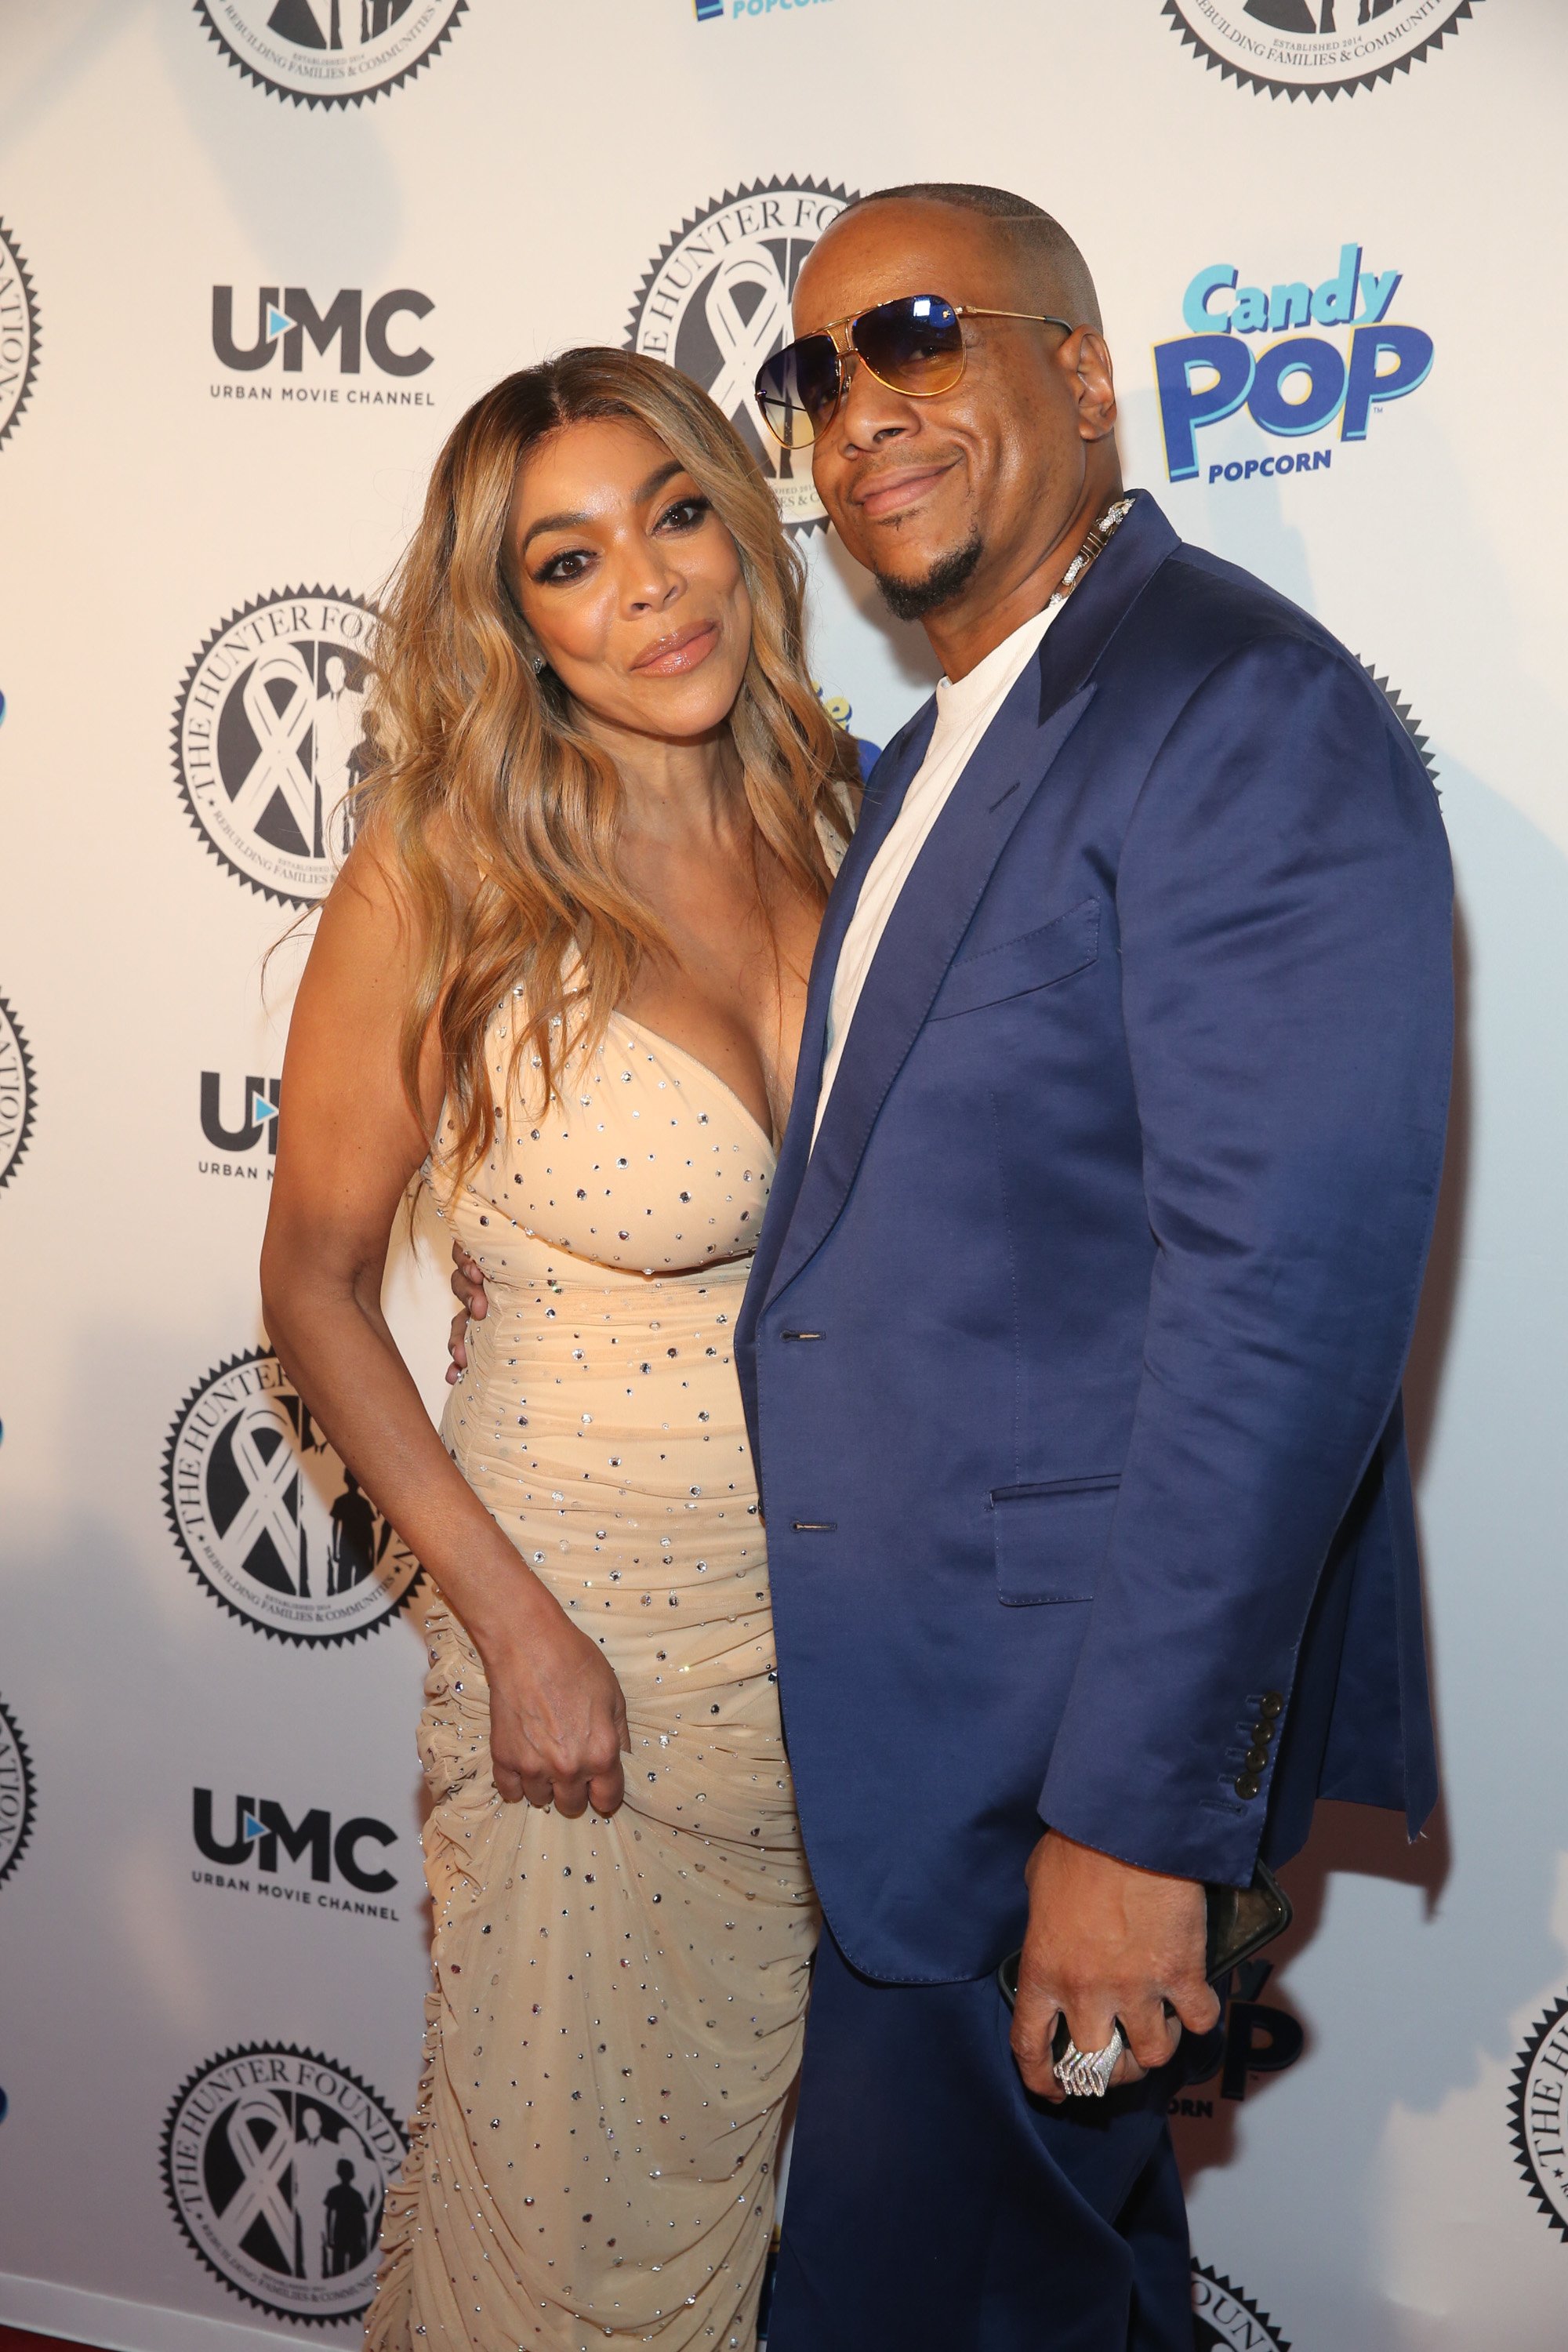 Kevin Hunter and Wendy WIlliams. | Photo: GettyImages